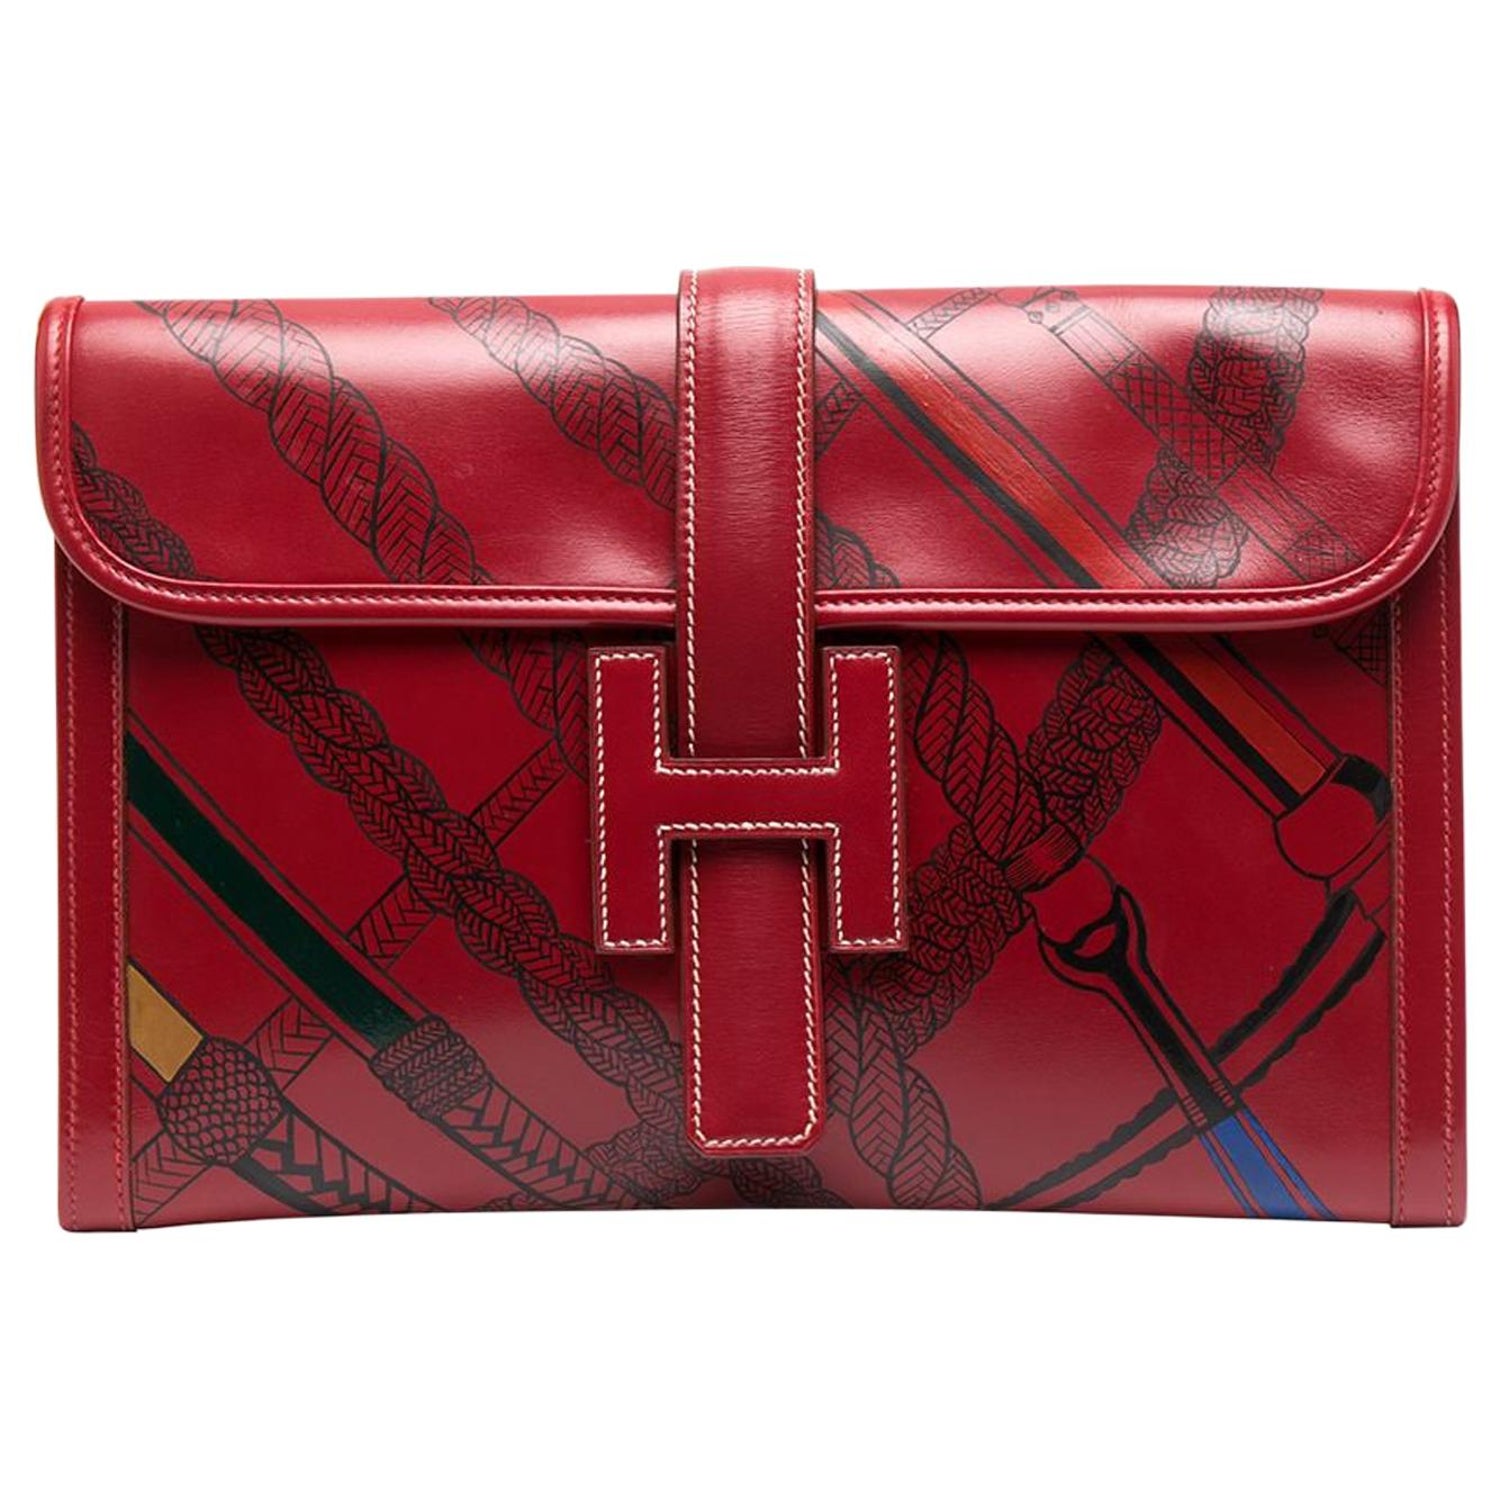 Louis Vuitton Monogram Savane Pochette Voyage MM M66639 is made to resemble  creations of LV, Kim Jones, and even Chapman Brother, all in one accessory.  View det…